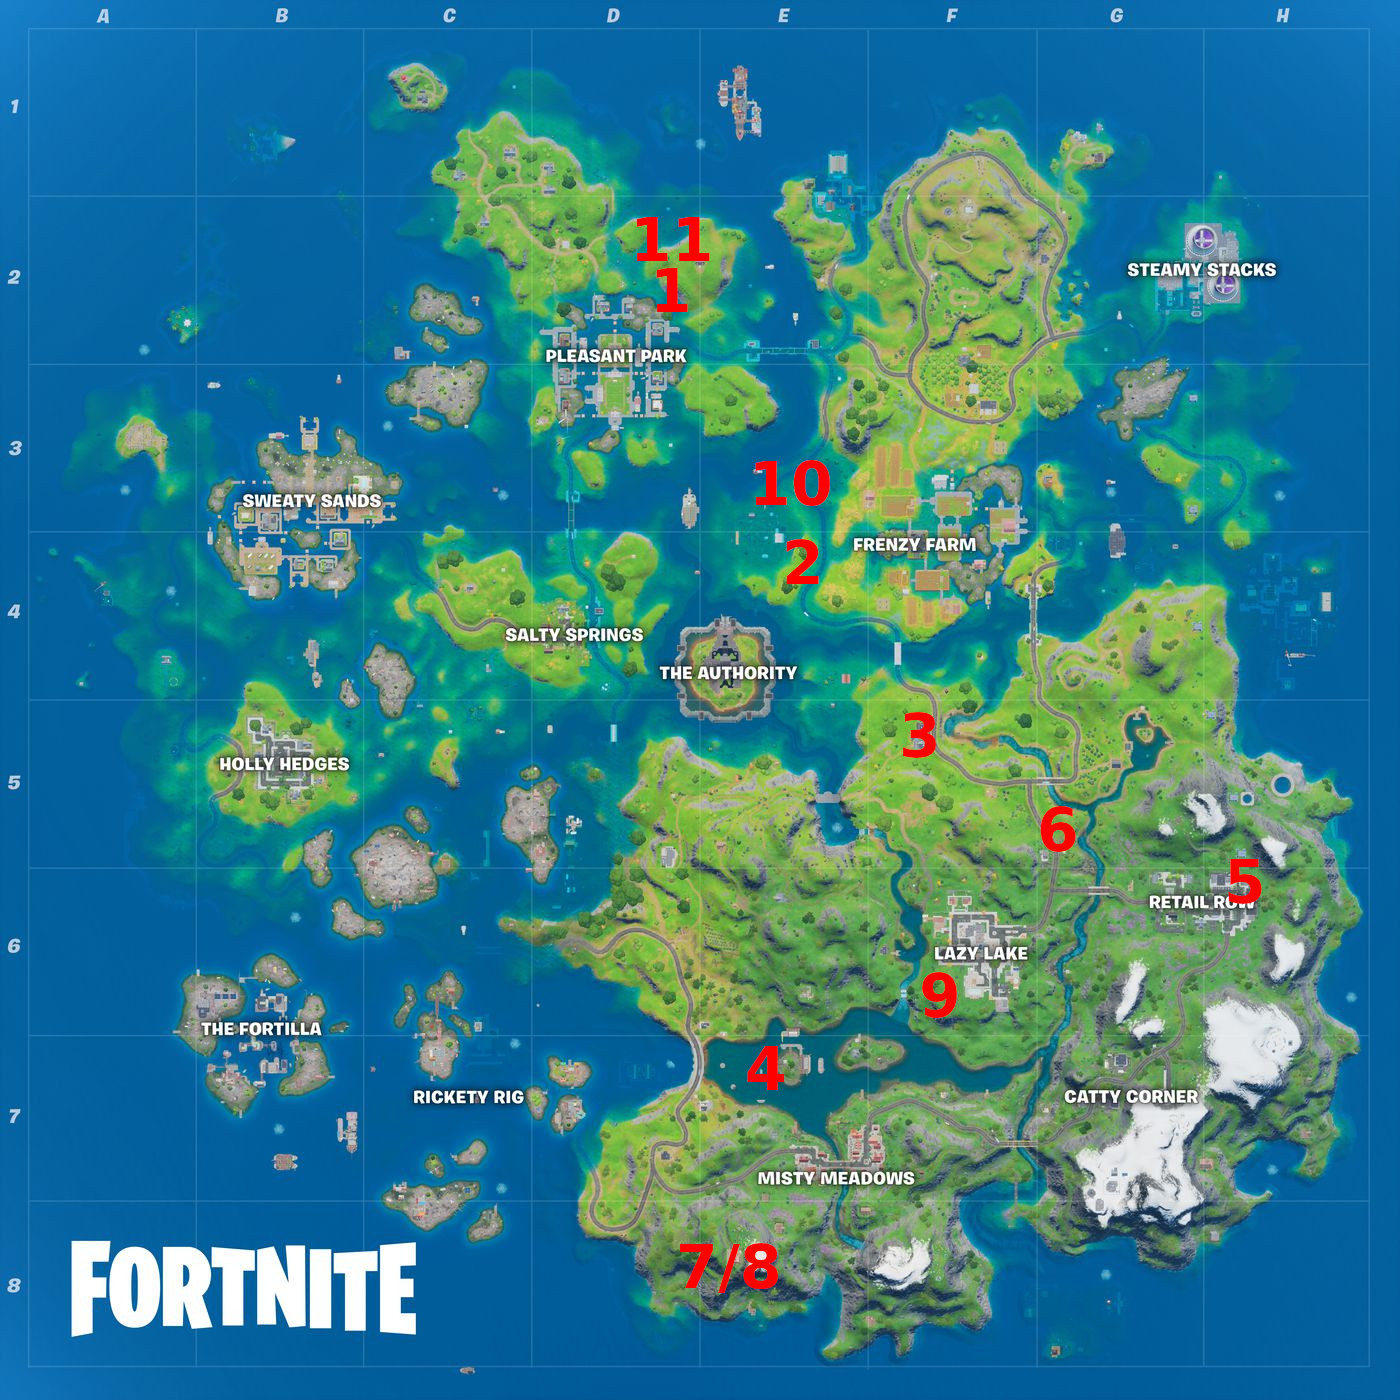 Fortnite Season 5 Week 9 XP coin locations: How to get Gold coin - GINX TV